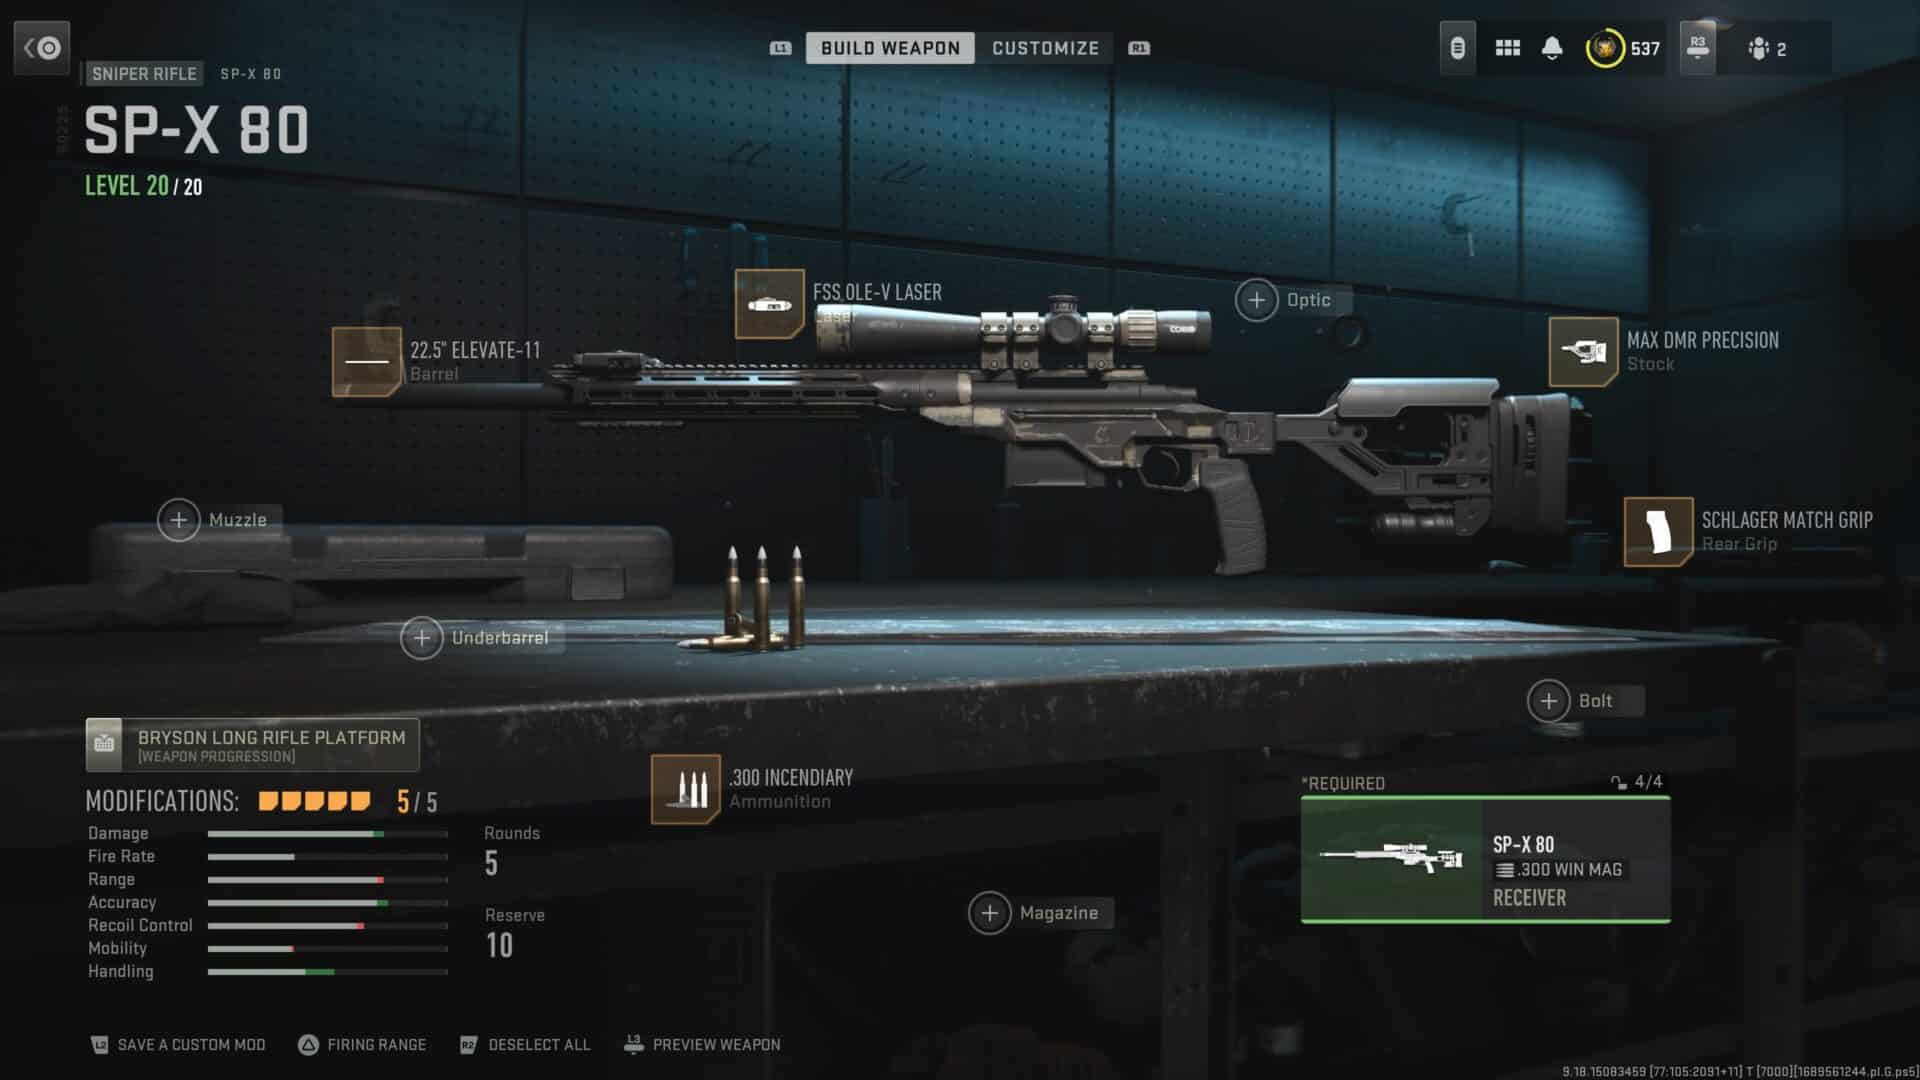 SP-X 80 Sniper Rifle Call of Duty: Warzone Loadout and attachments in the Gunsmith